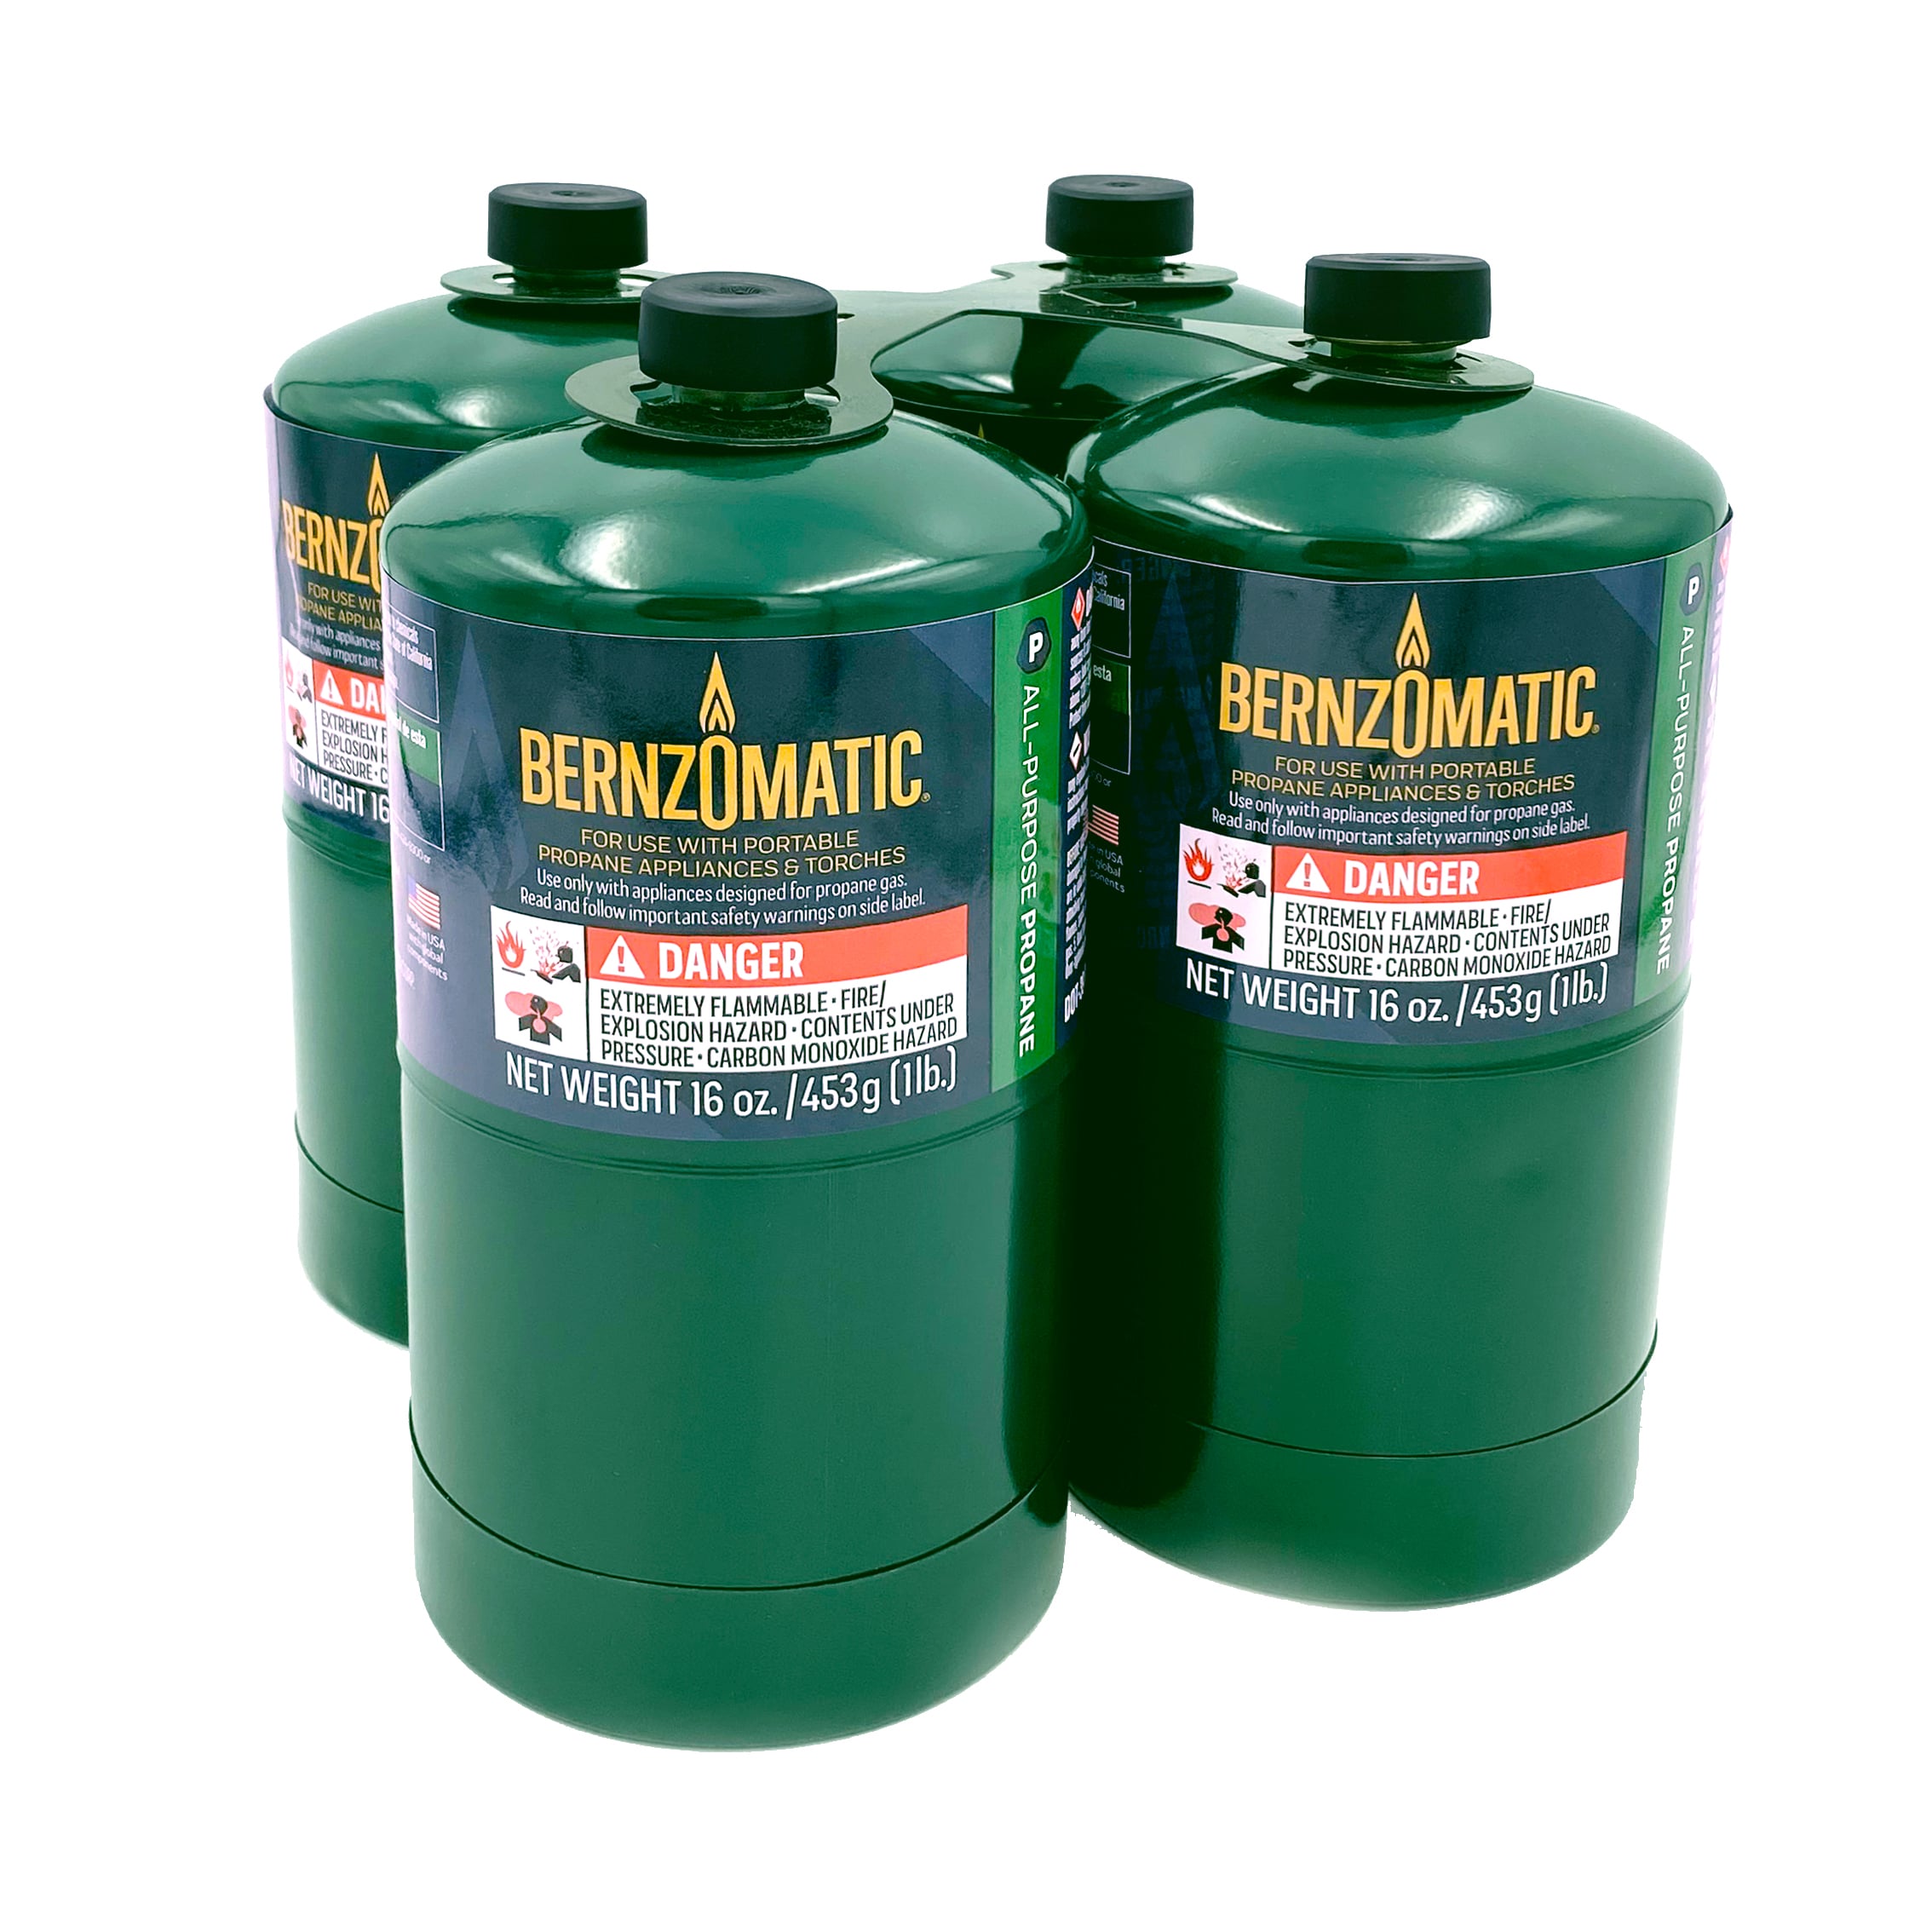 Bernzomatic Butane Torch Cylinder for Heating Applications, Flame  Temperature up to 3,150F, Universal Fueling Tip, Odorized - 2-in Length,  0.55 lbs. in the Handheld Torches department at